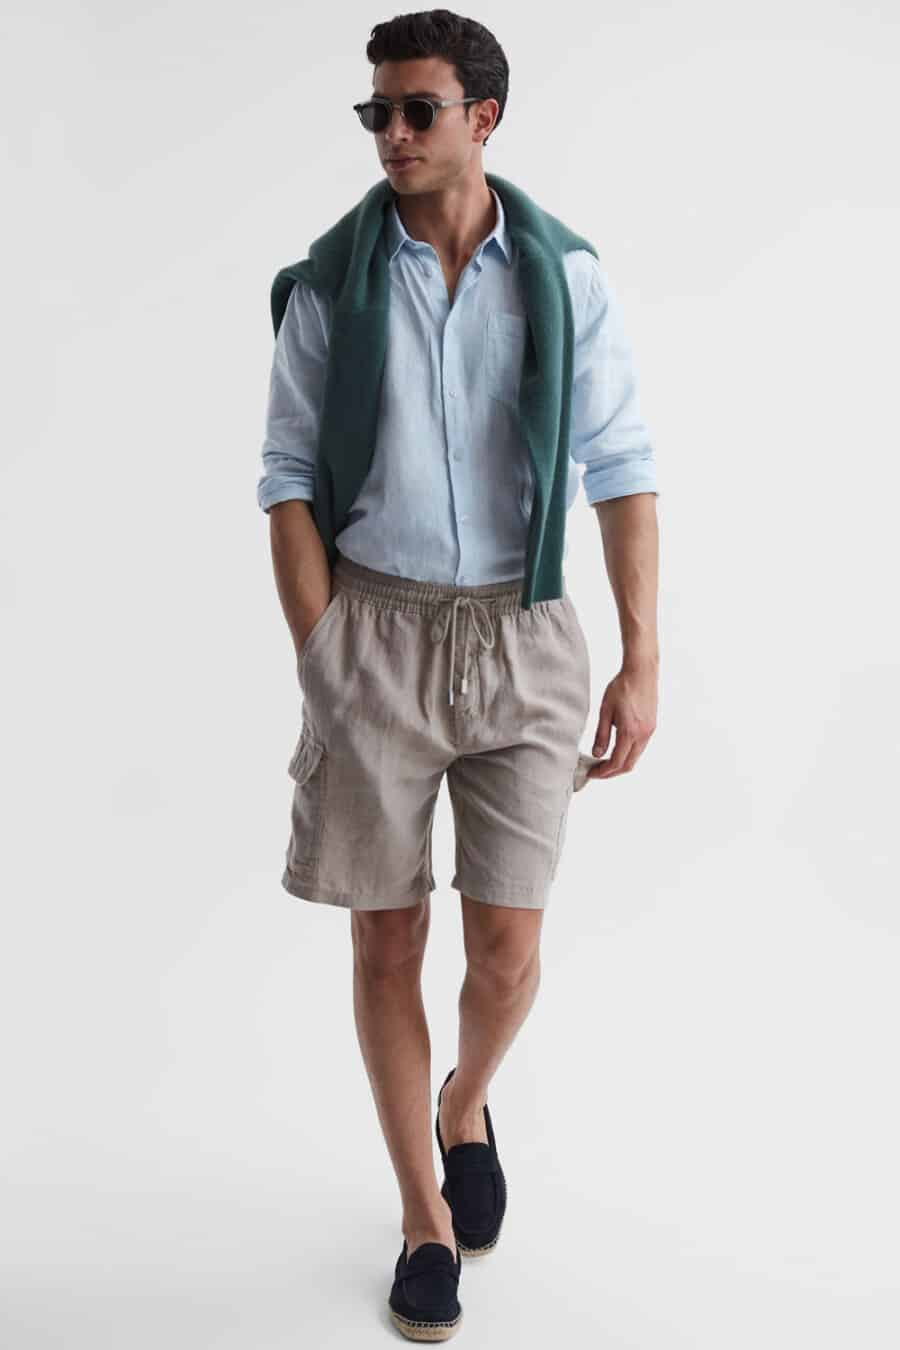 Men's grey cargo shorts, blue Oxford shirt, green sweater and navy espadrilles outfit